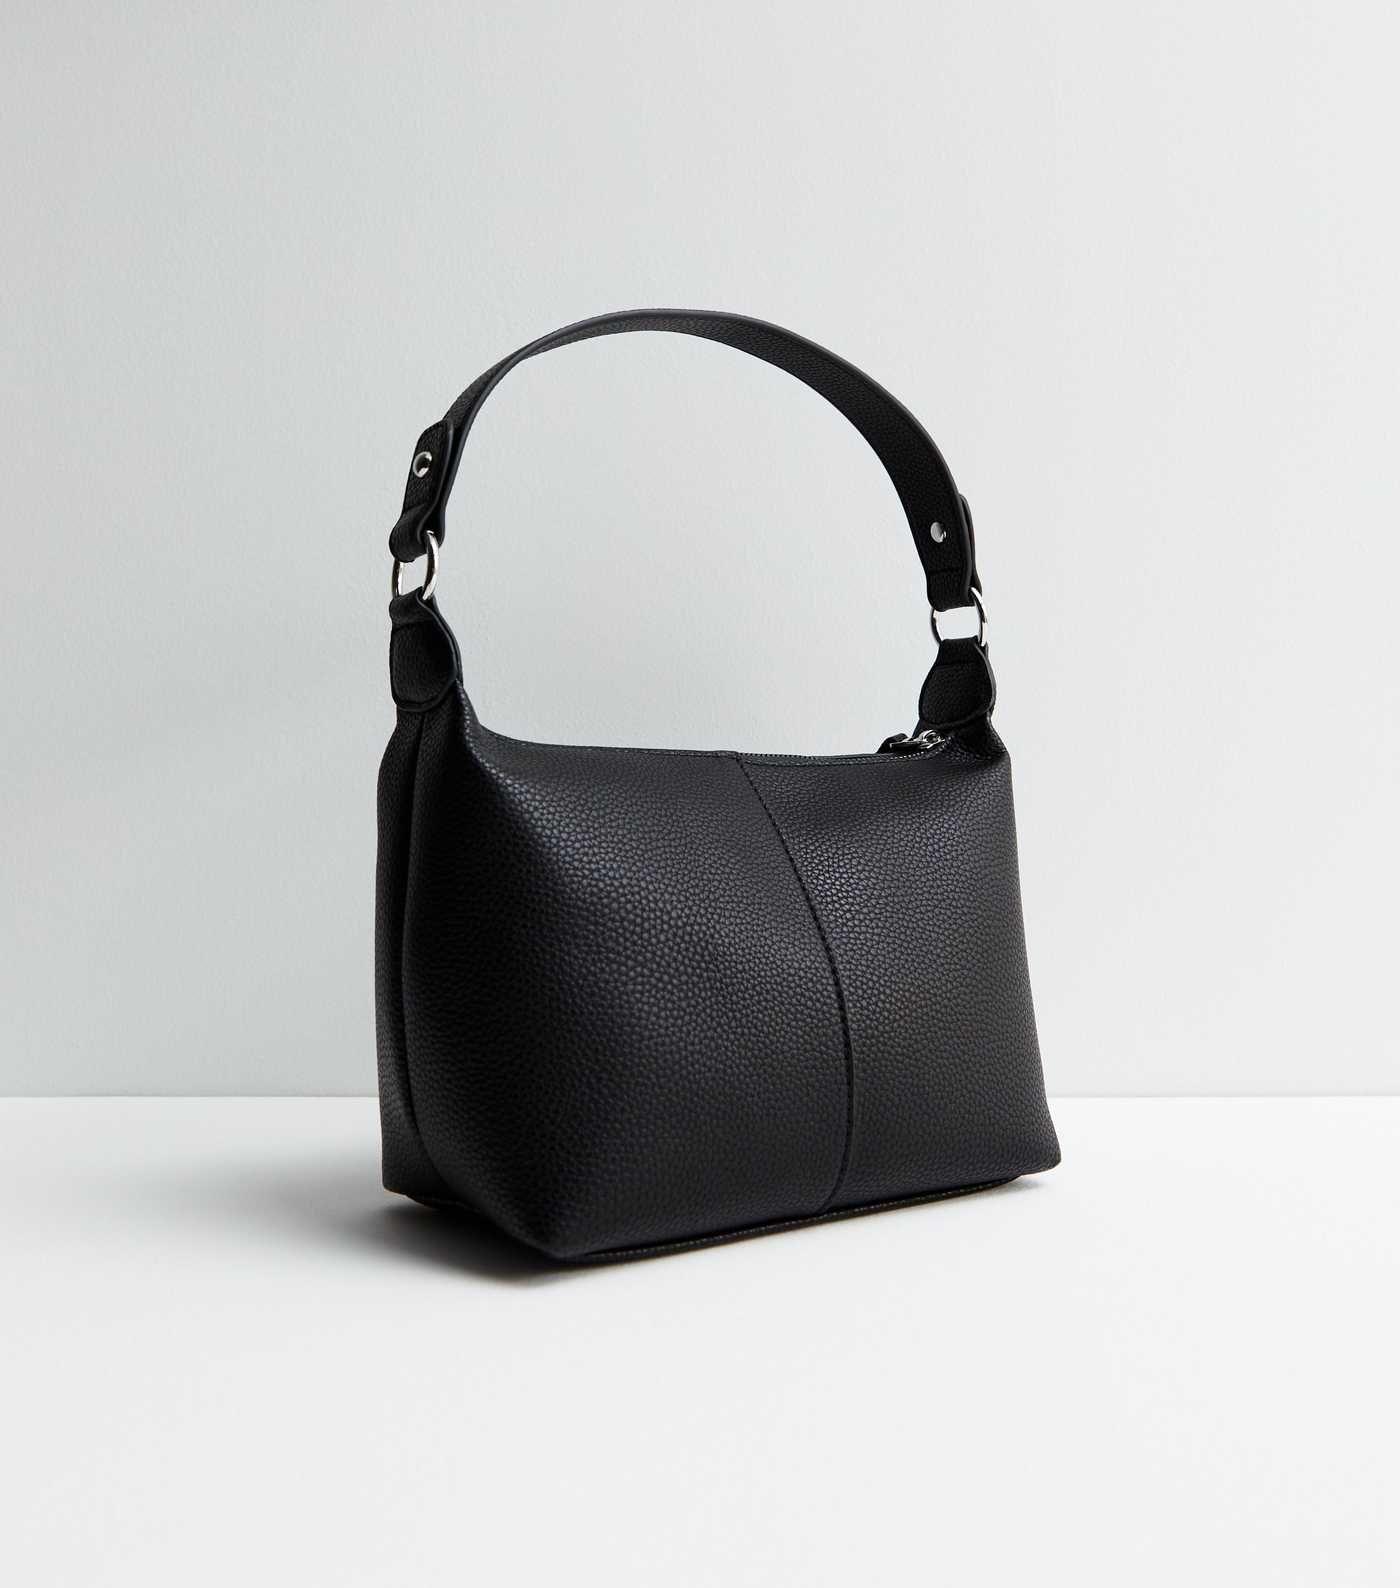 Black Leather-Look Zip Front Shoulder Bag
						
						Add to Saved Items
						Remove from Saved... | New Look (UK)